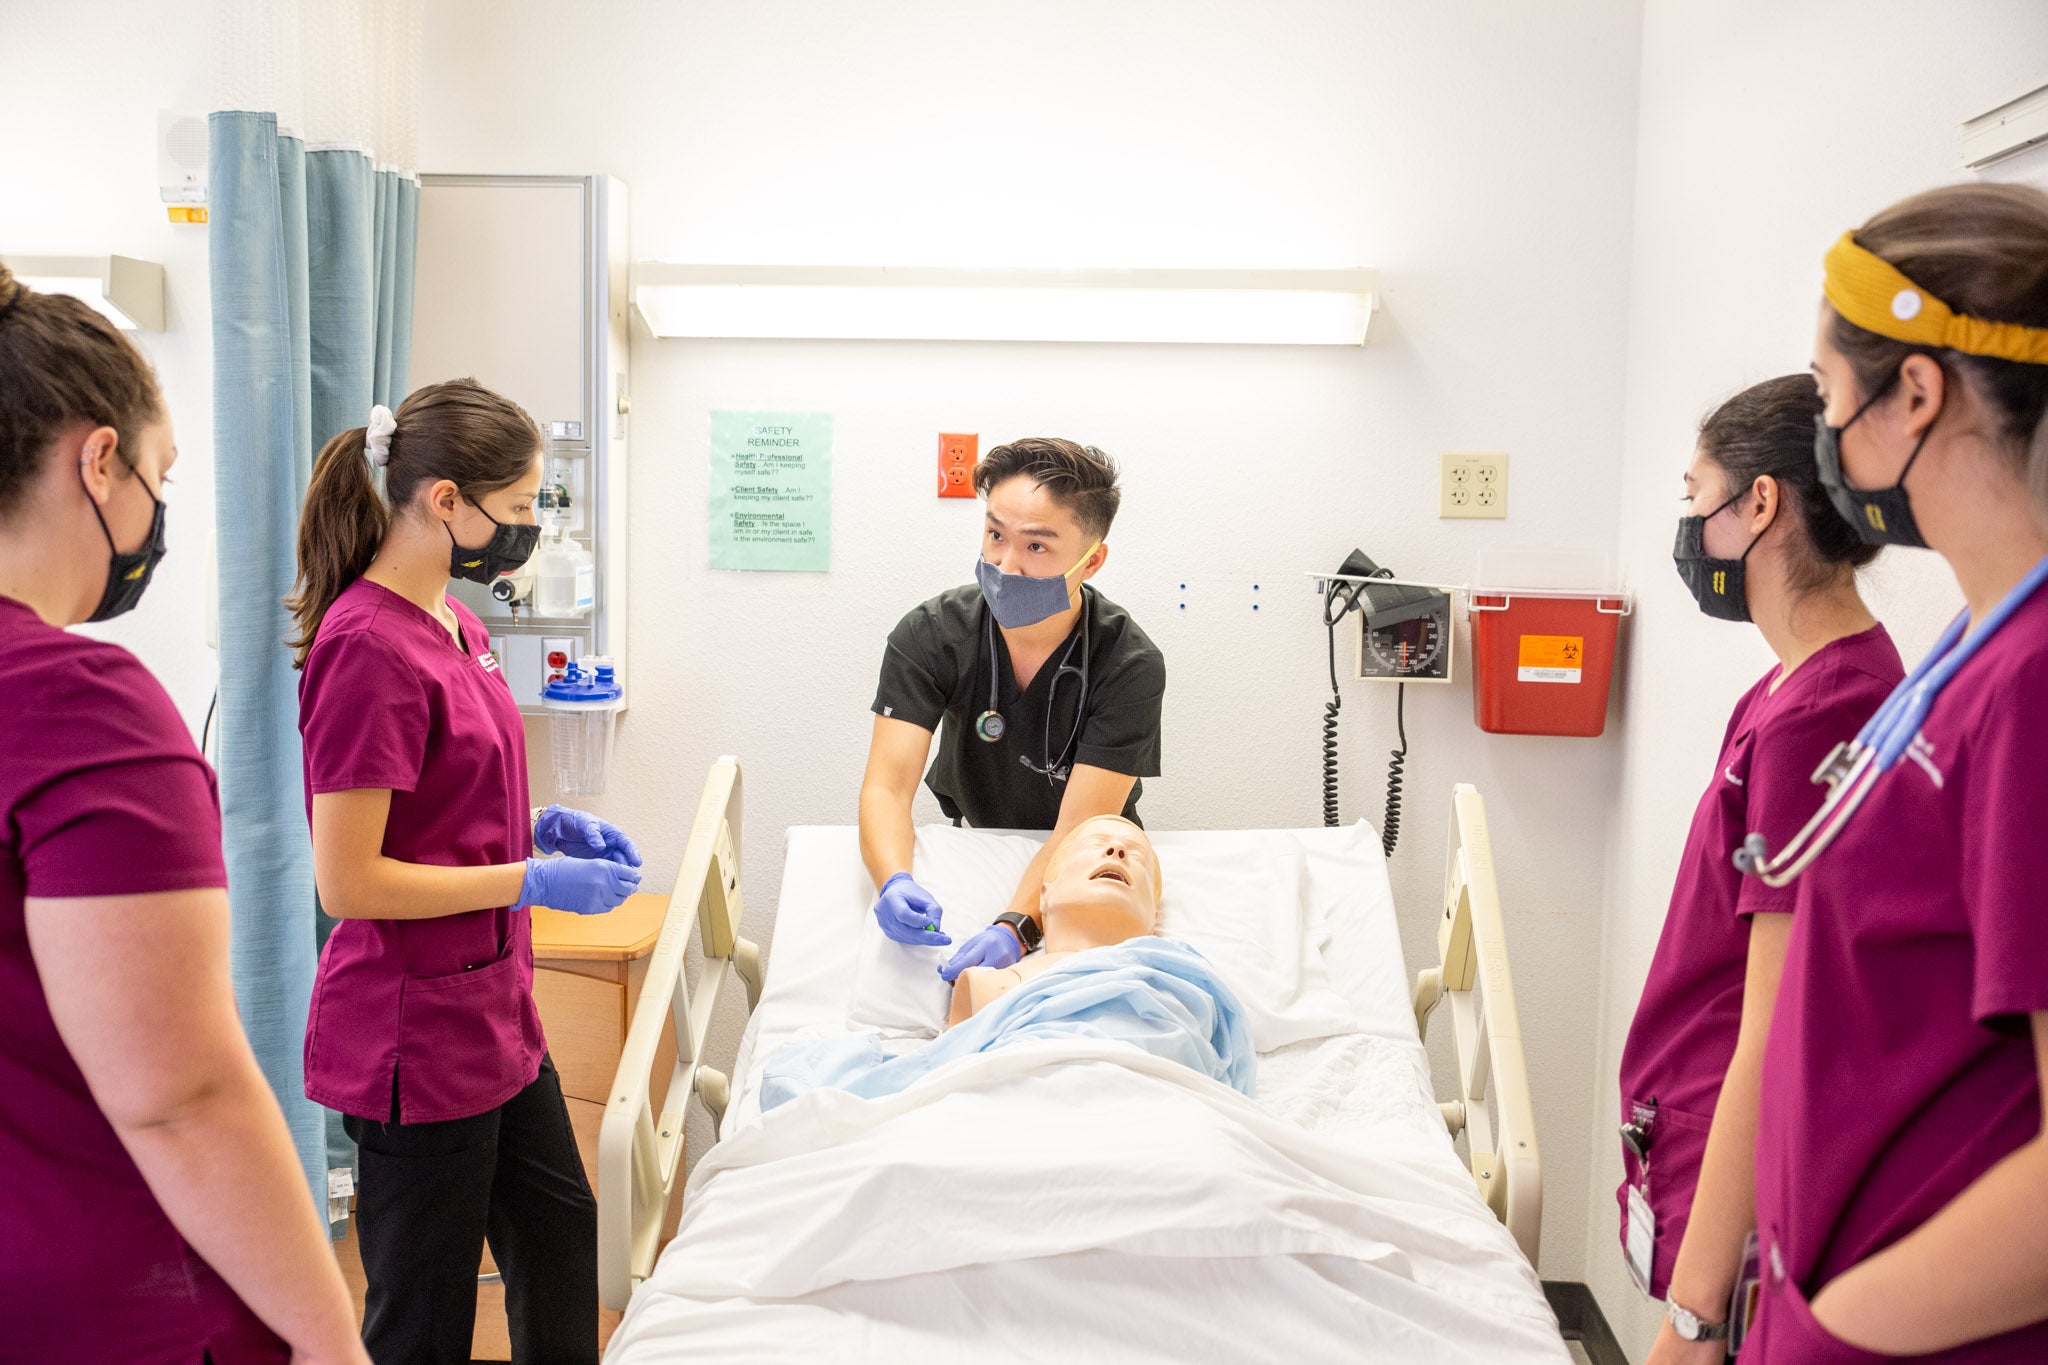 Edson College Faculty Associate Joseph Tran demonstrates proper injection site on a manikin for nursing students.